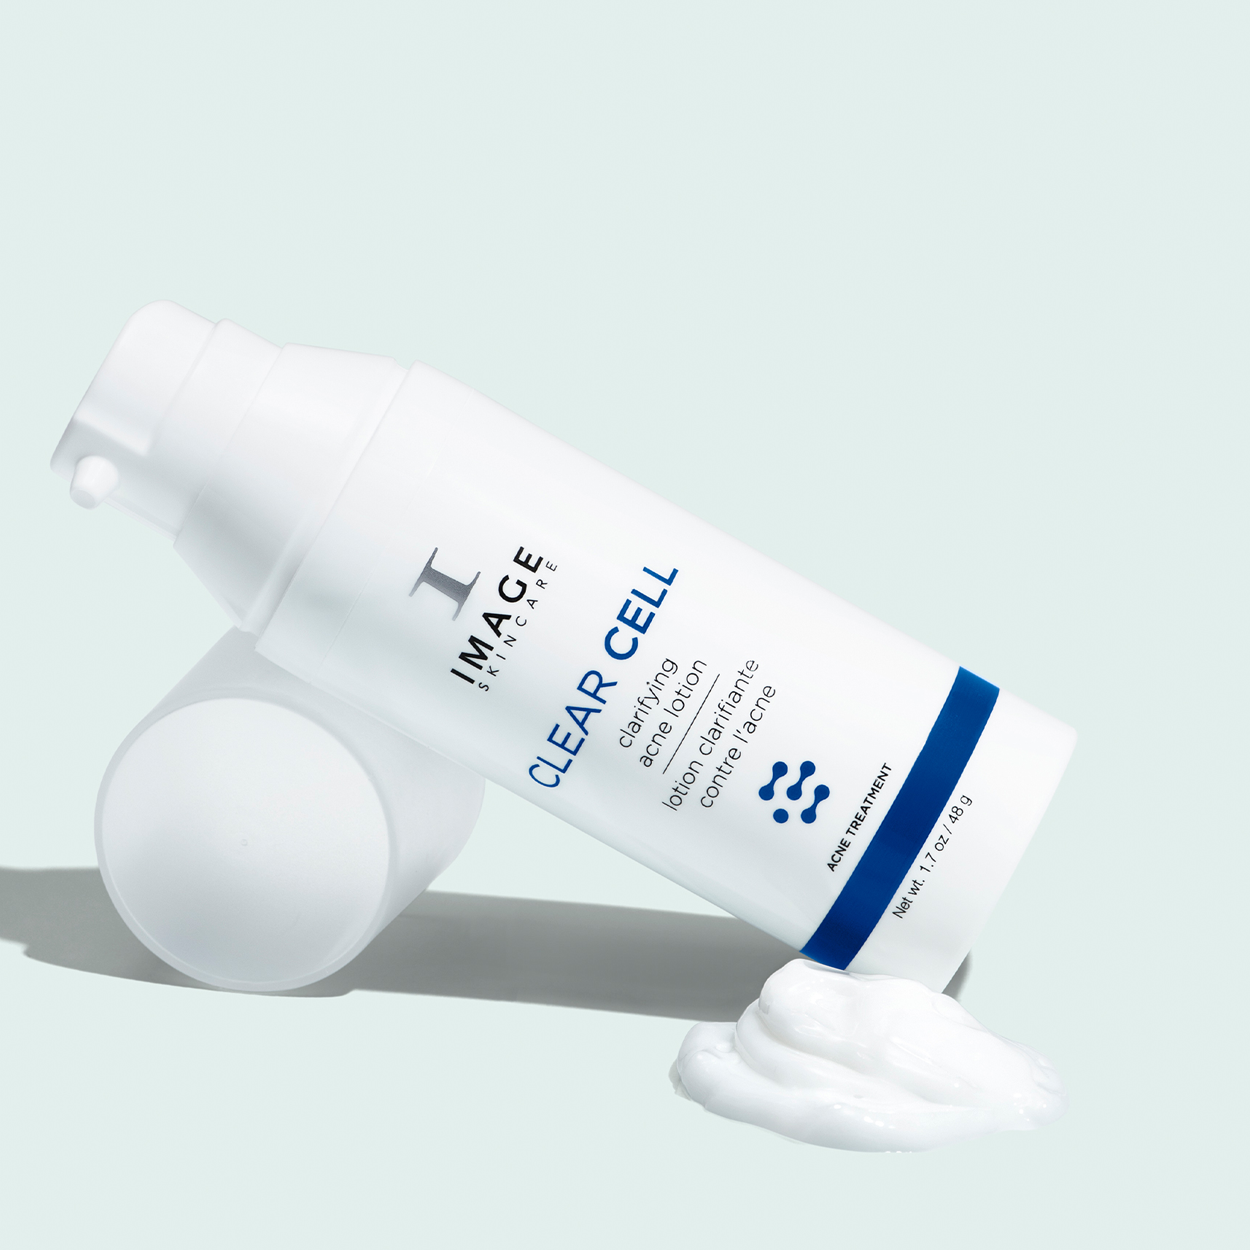 Clear Cell Clarifying Acne Lotion